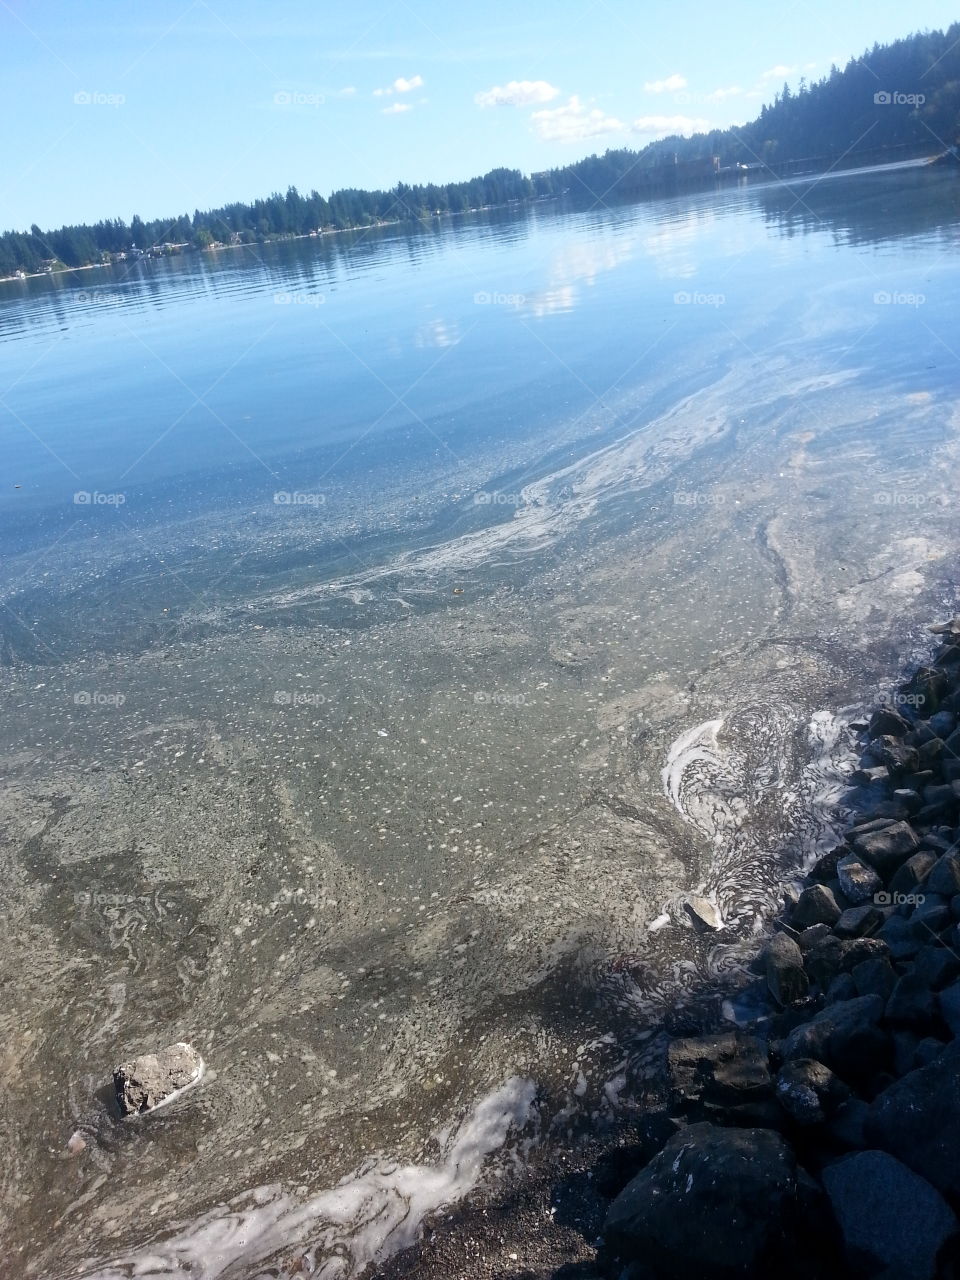 Grody Shores. pollution in the puget sound. among it were dead crabs and sand dollars. people swim in this.